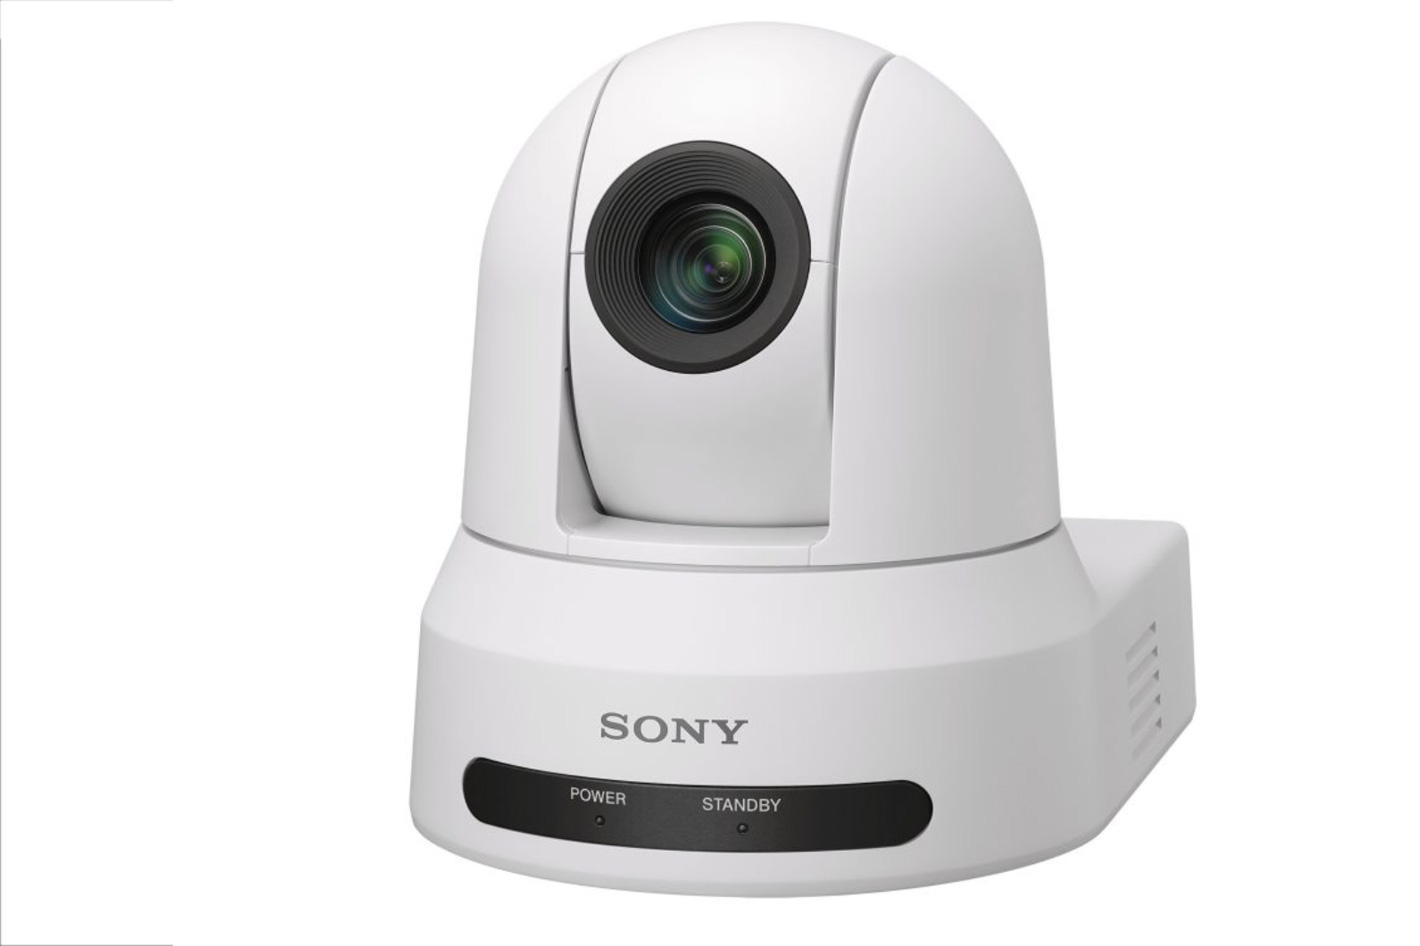 Sony SRG-X40UH: a new PTZ camera with powerful zoom